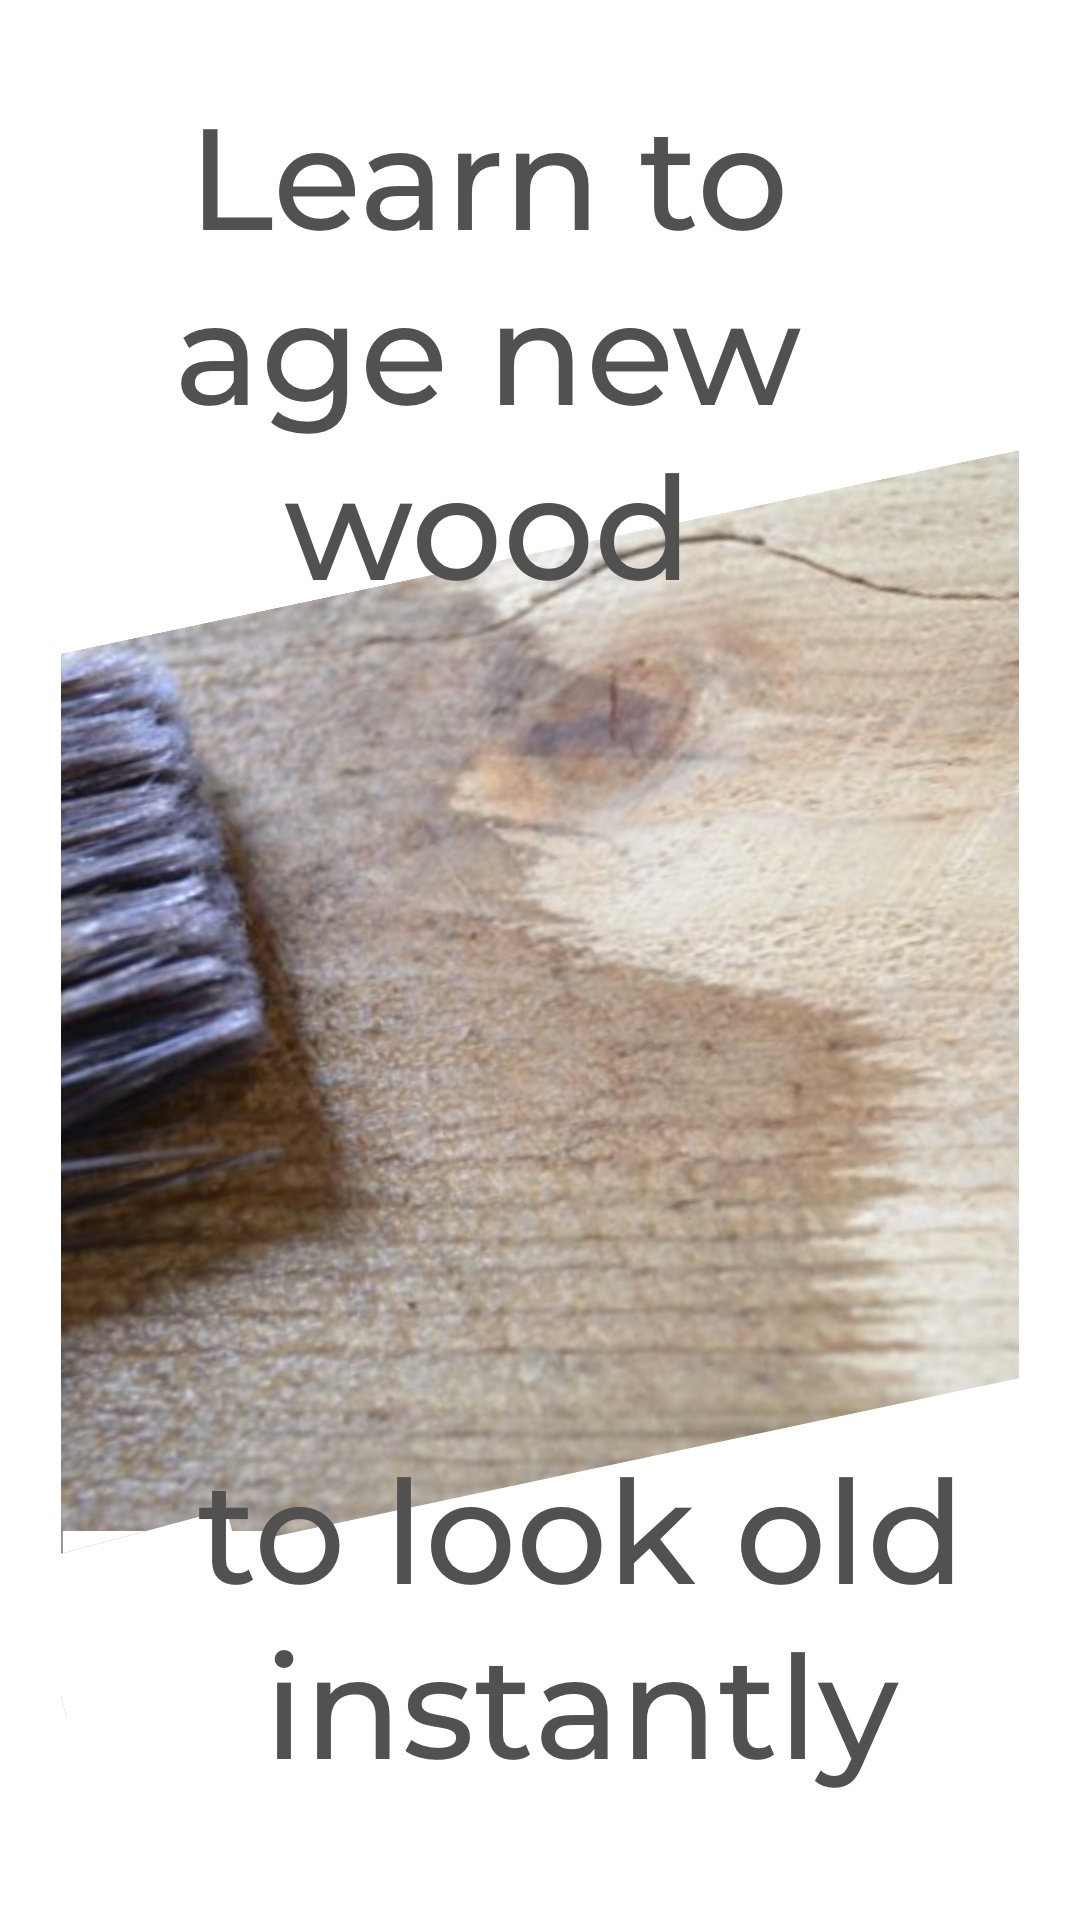 Aging Wood Instantly